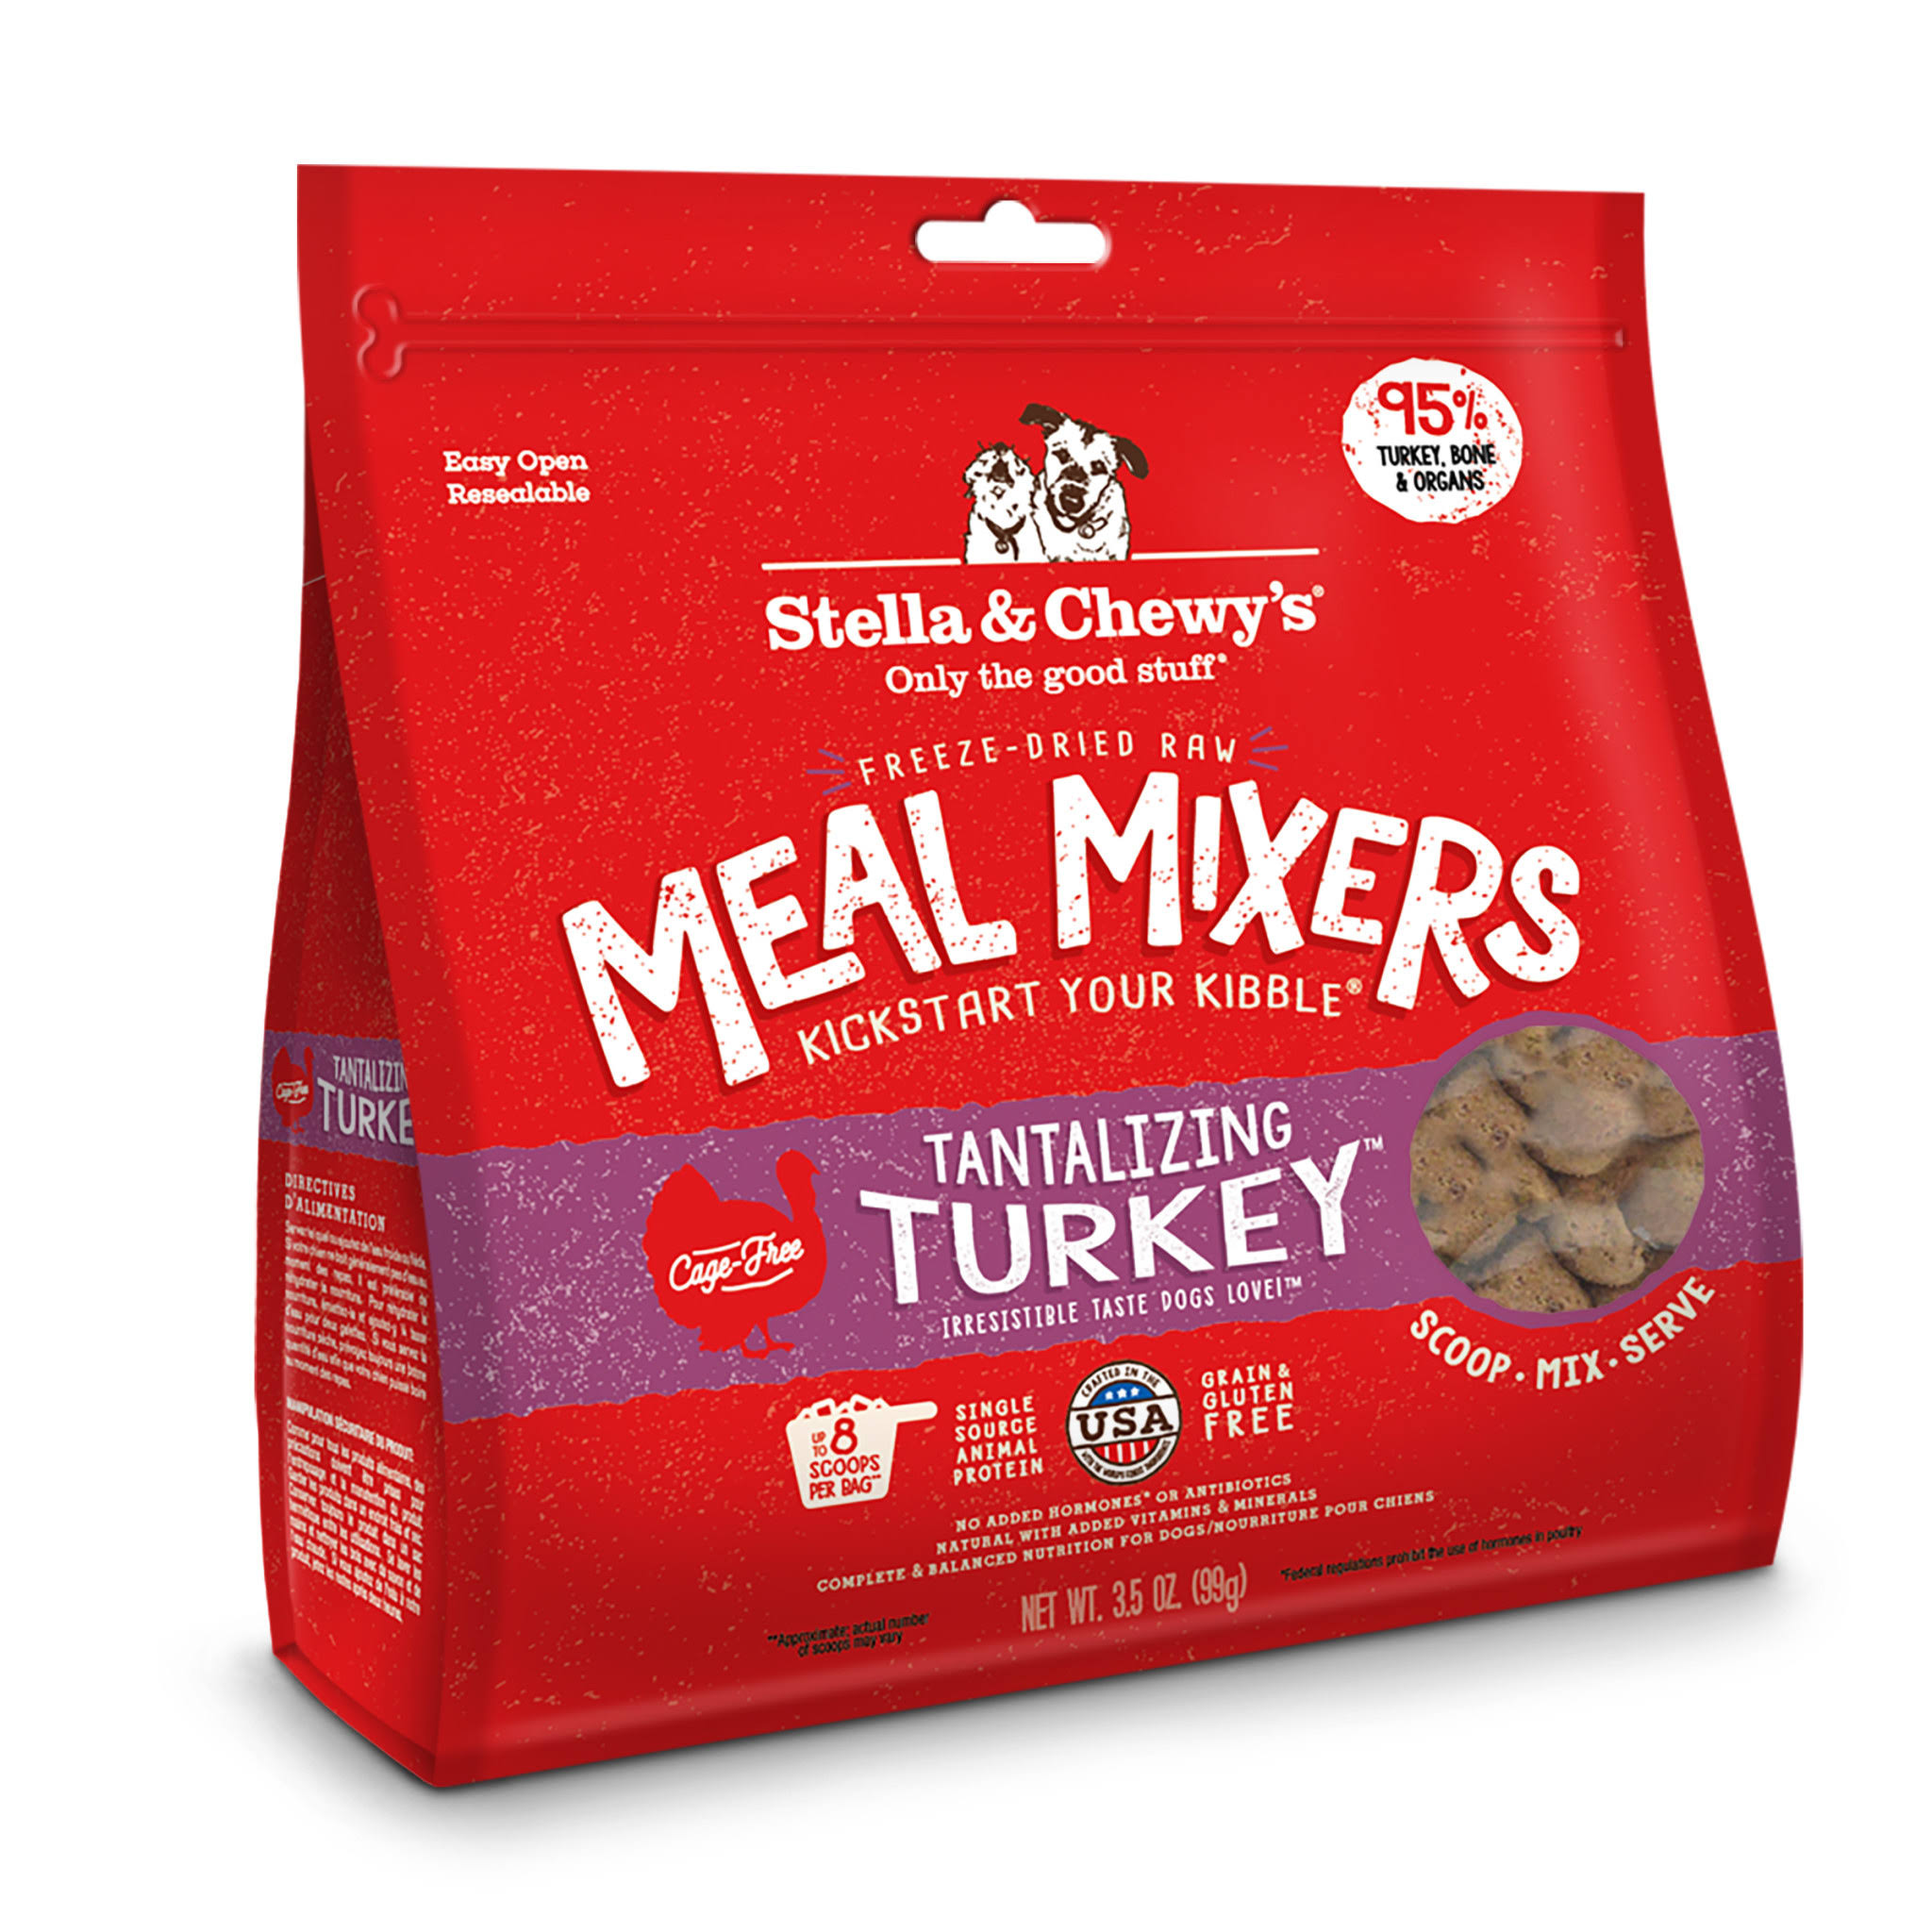 Stella & Chewy's Freeze-Dried Dog Treats - Tantalizing Turkey Meal Mixers